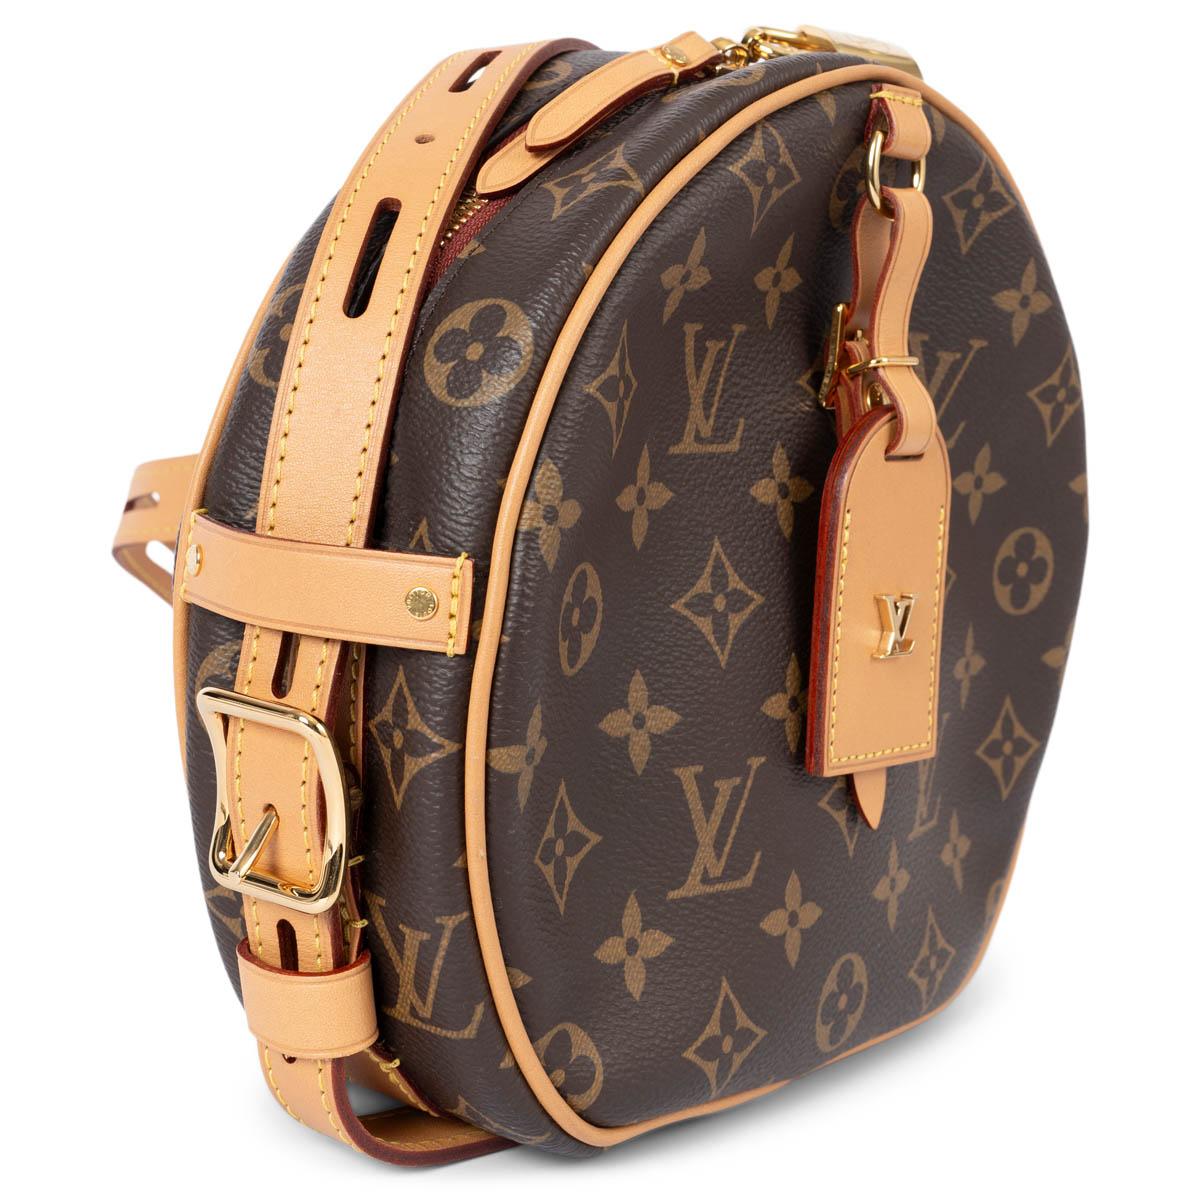 100% authentic Louis Vuitton Boite Chapeau Souple MM shoulder bag in Ebene brown Monogram canvas with aged natural cowhide trims. Features adjustable shoulder strap for shoulder or crossbody carrying, a luggage tag and an outside pocket on the back.